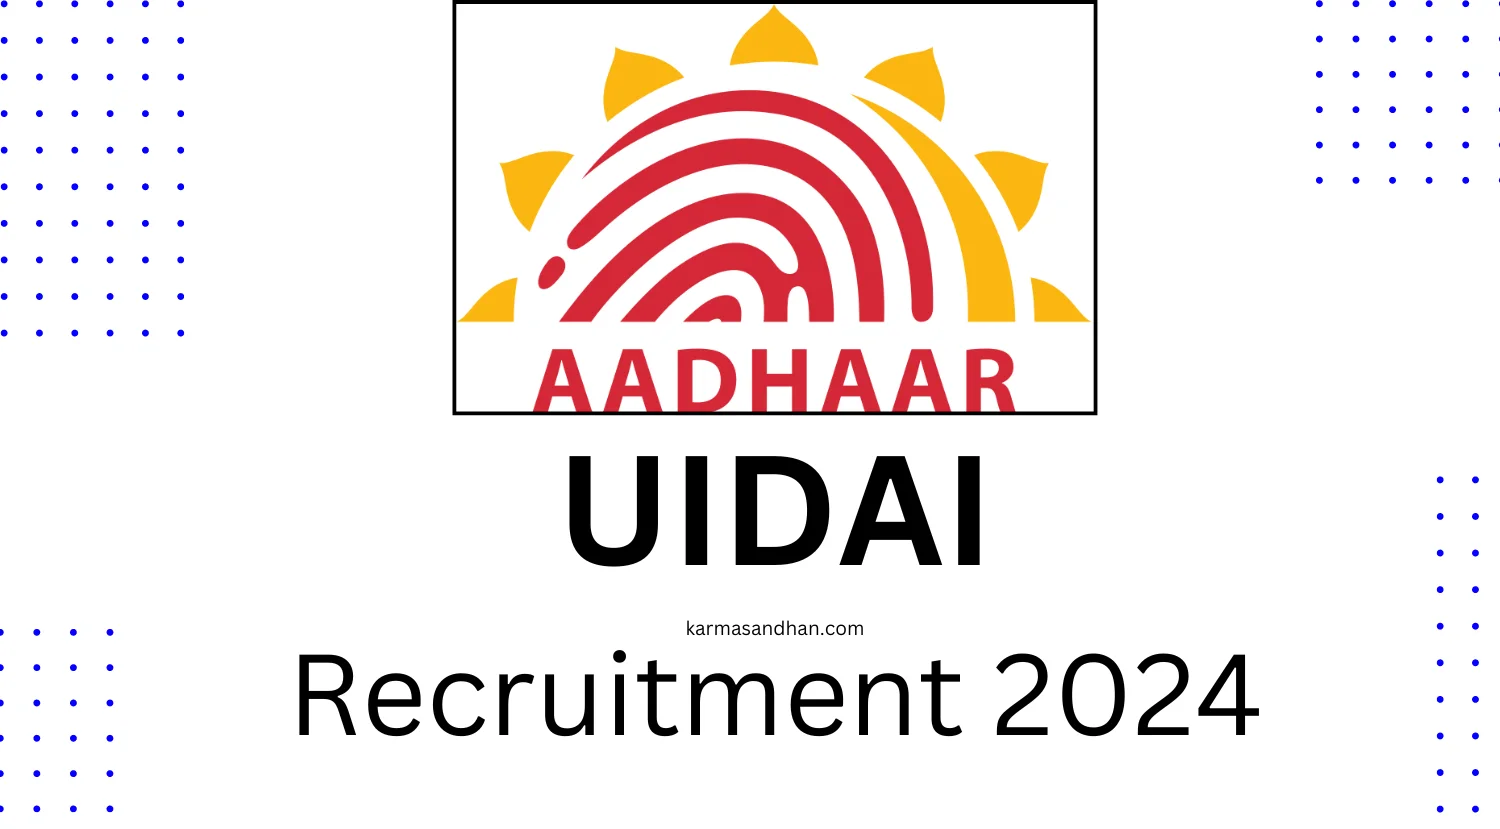 UIDAI Recruitment 2024 Notification, Apply Now for Senior Accounts Officer Posts